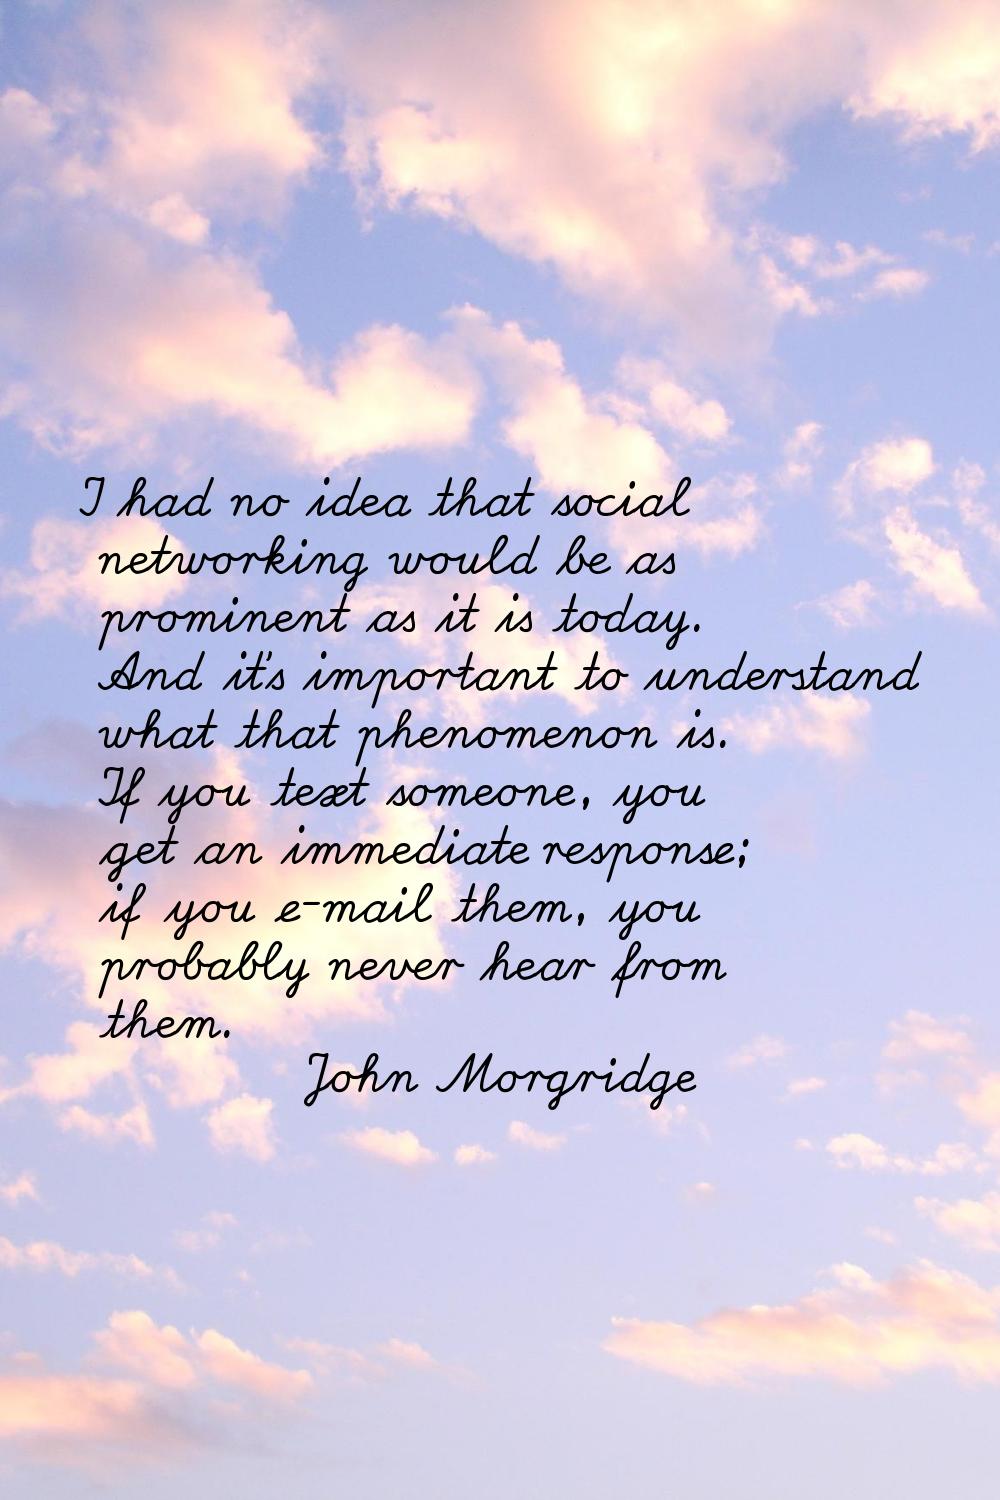 I had no idea that social networking would be as prominent as it is today. And it's important to un